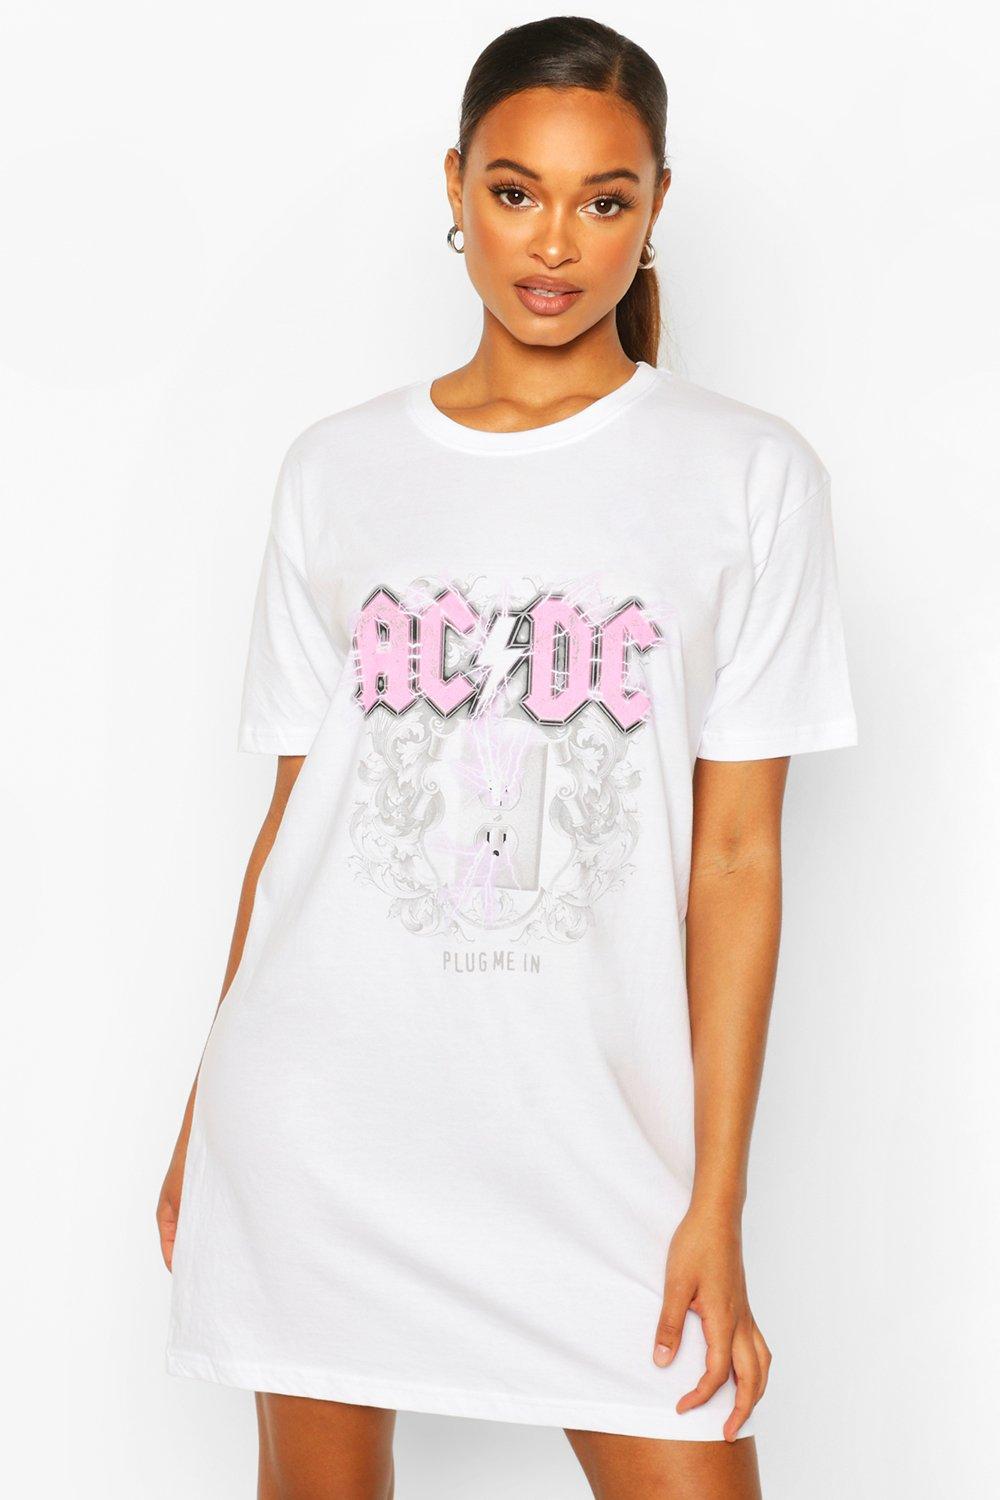 acdc graphic tee womens